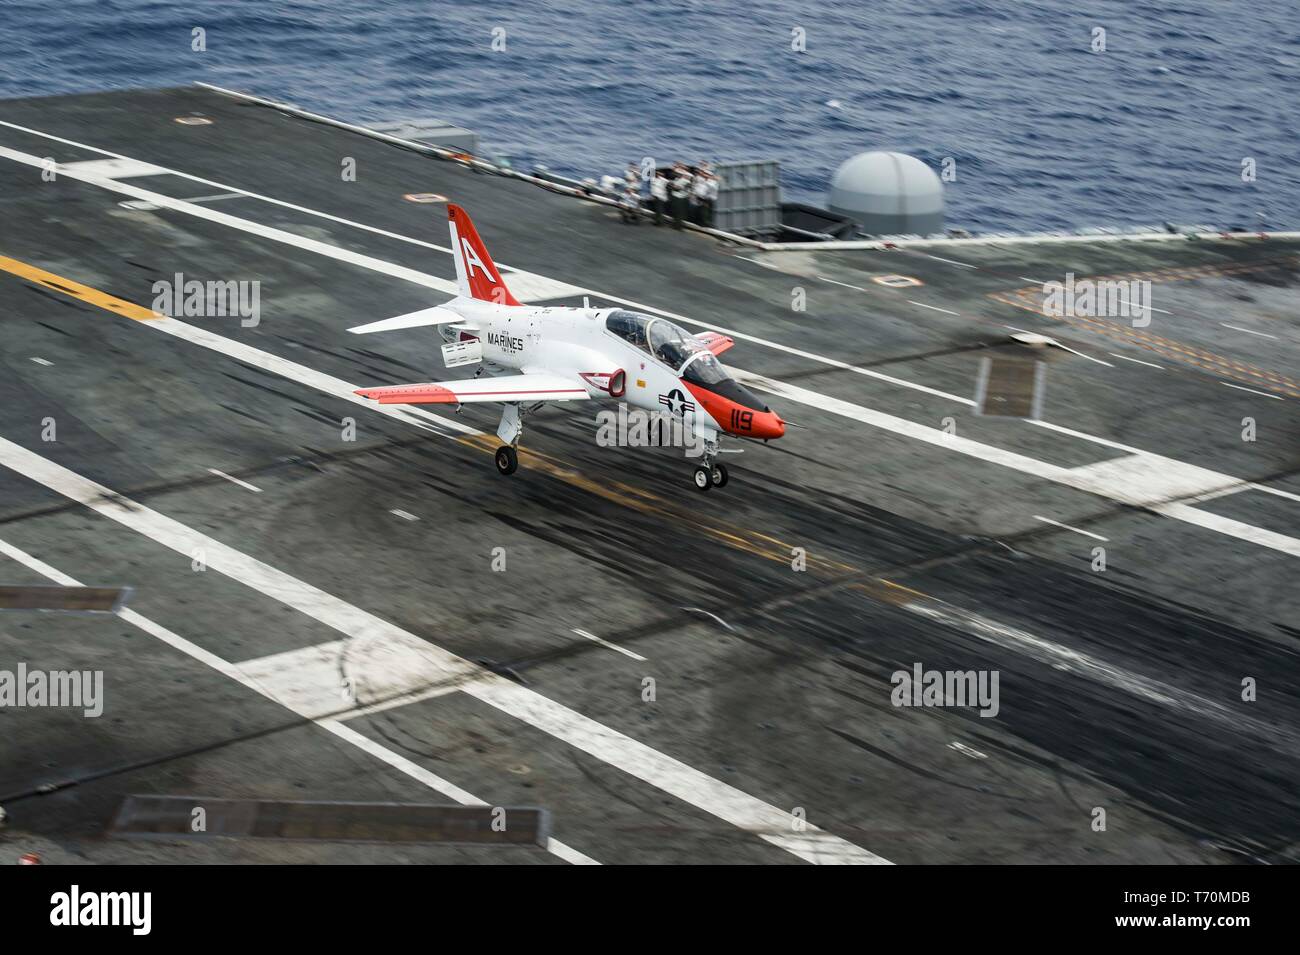 190502-N-KT825-0005  ATLANTIC OCEAN (May 2, 2019) A T-45C Goshawk training aircraft assigned to Training Air Wing (TW) 2 lands on the flight deck aboard the aircraft carrier USS Dwight D. Eisenhower (CVN 69). Ike is underway in the Atlantic Ocean conducting carrier qualifications while in the basic phase of the Optimized Fleet Response Plan. (U.S. Navy photo by Mass Communication Specialist Seaman Sawyer Haskins) Stock Photo